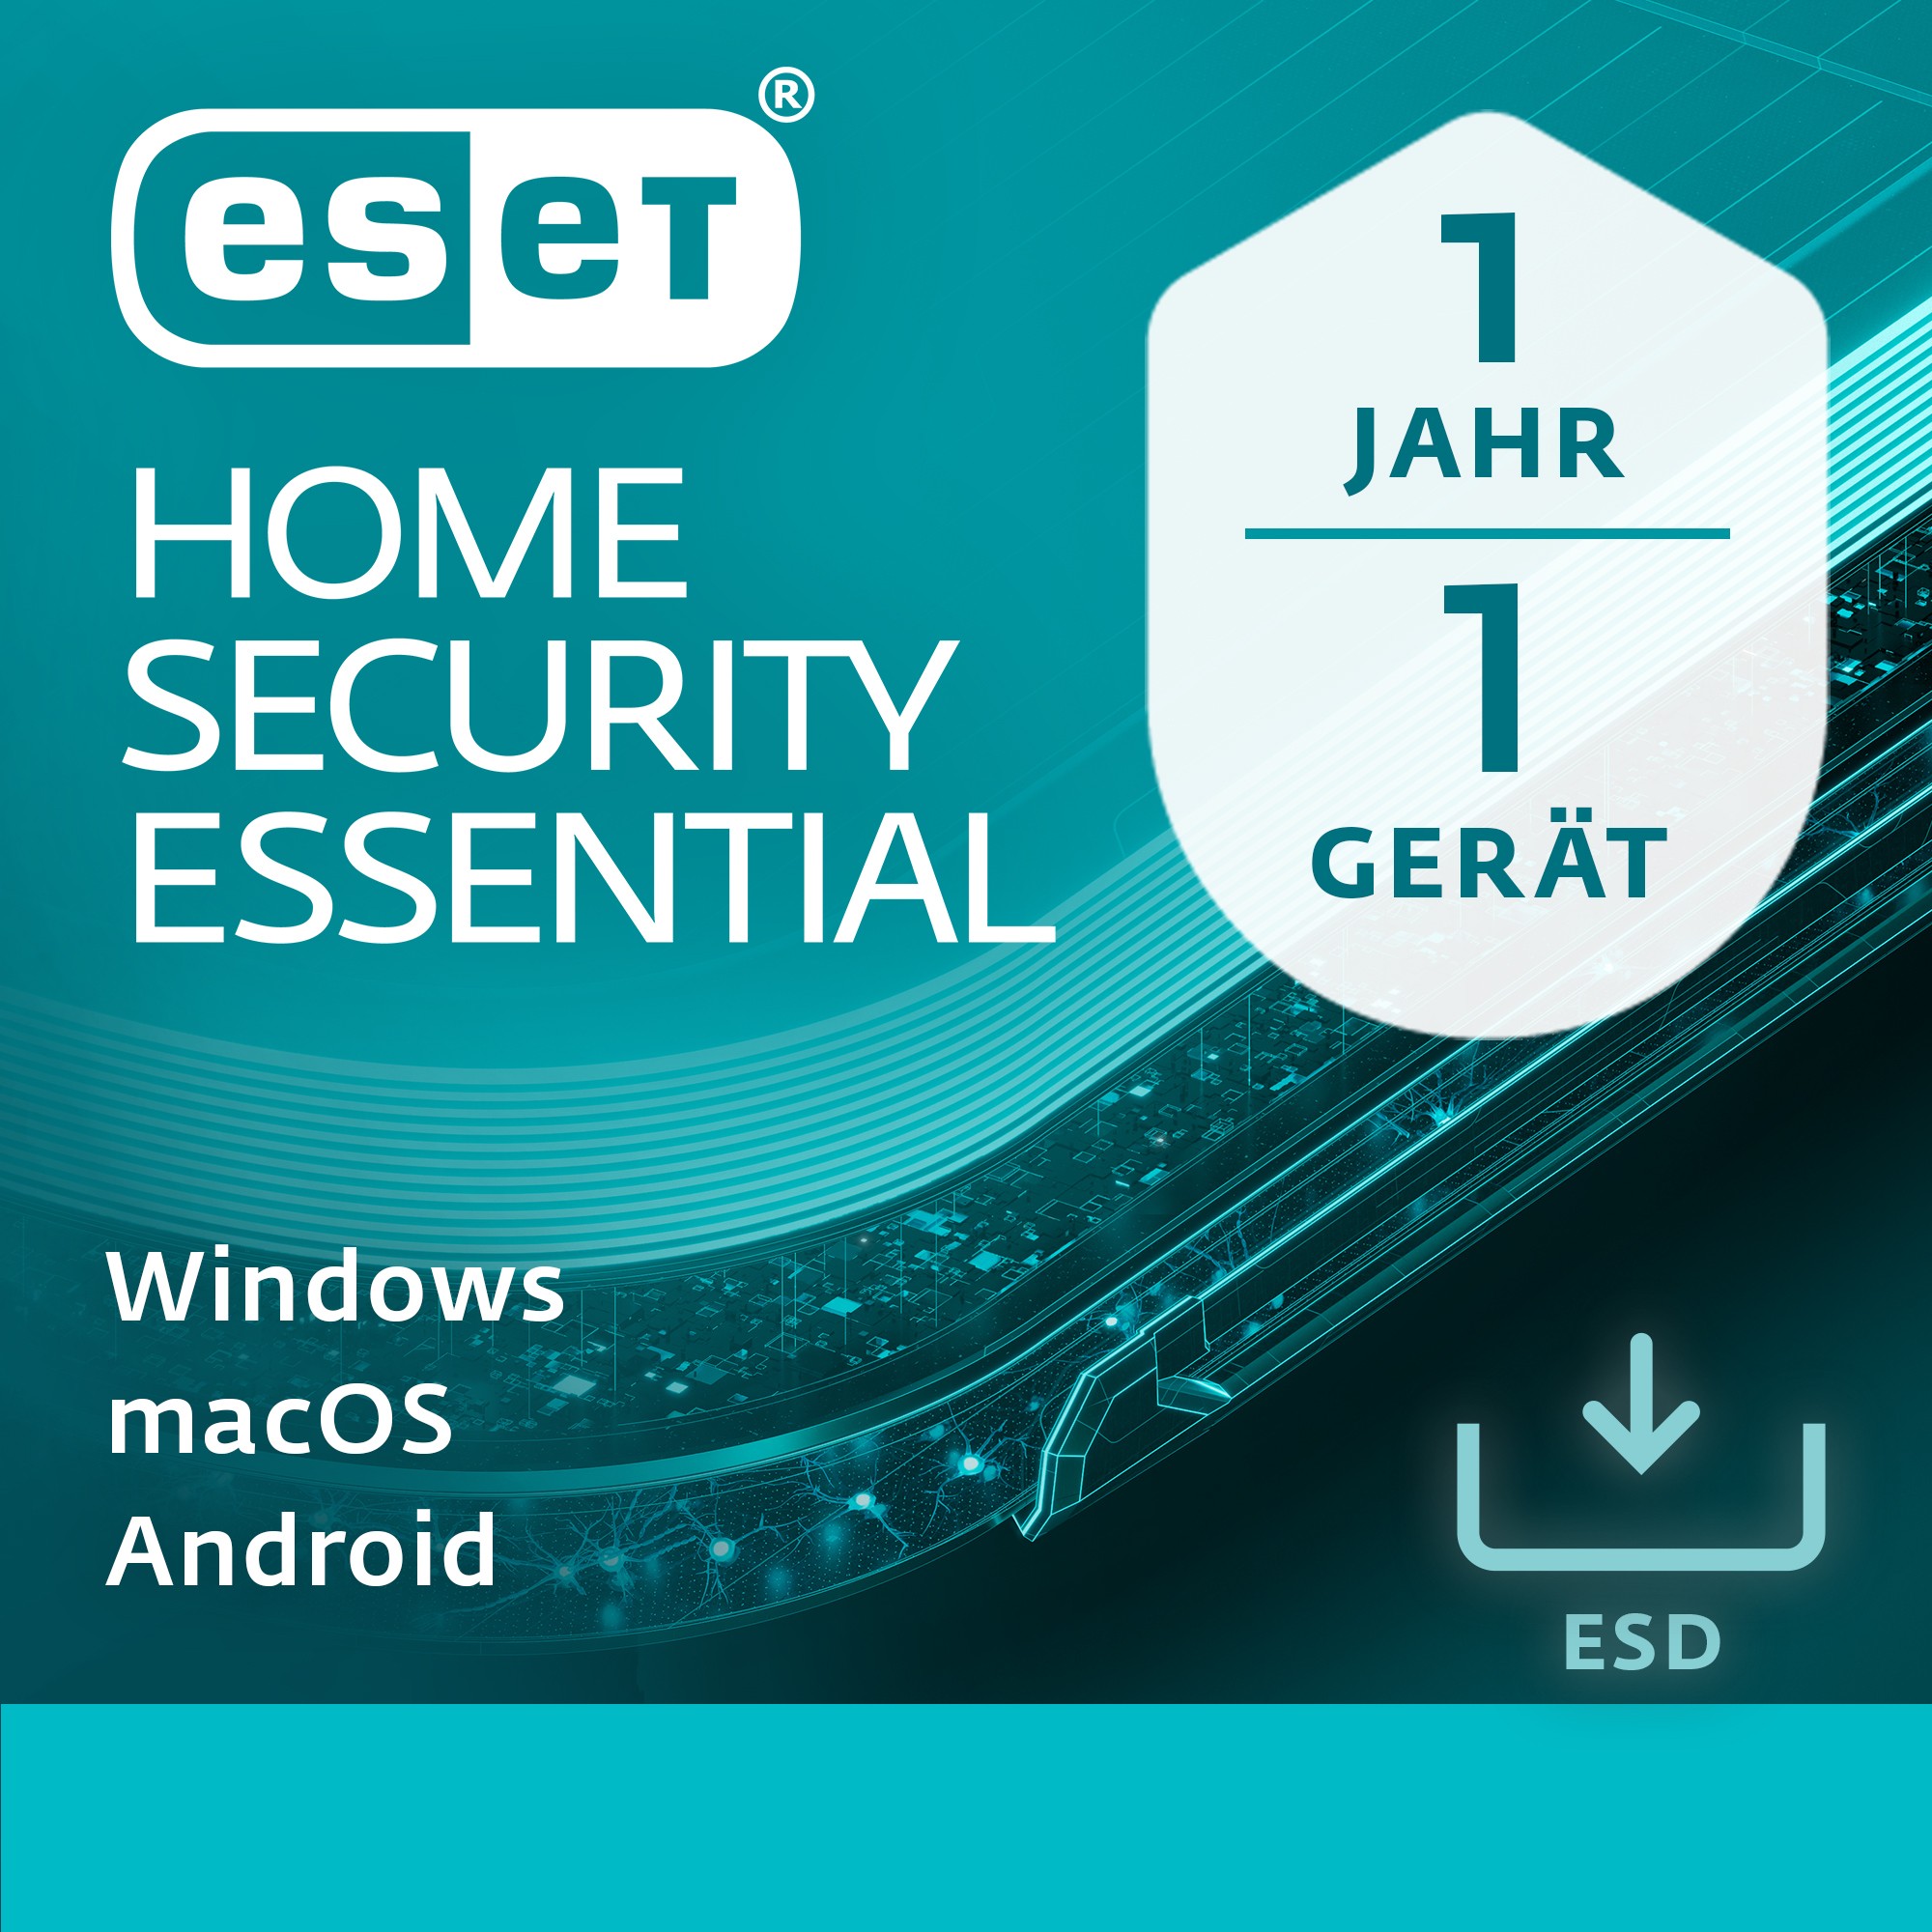 ESET Home Security Essential - 1 User. 1 Year - ESD-DownloadESD - EHSE-N1A1-VAKT-E